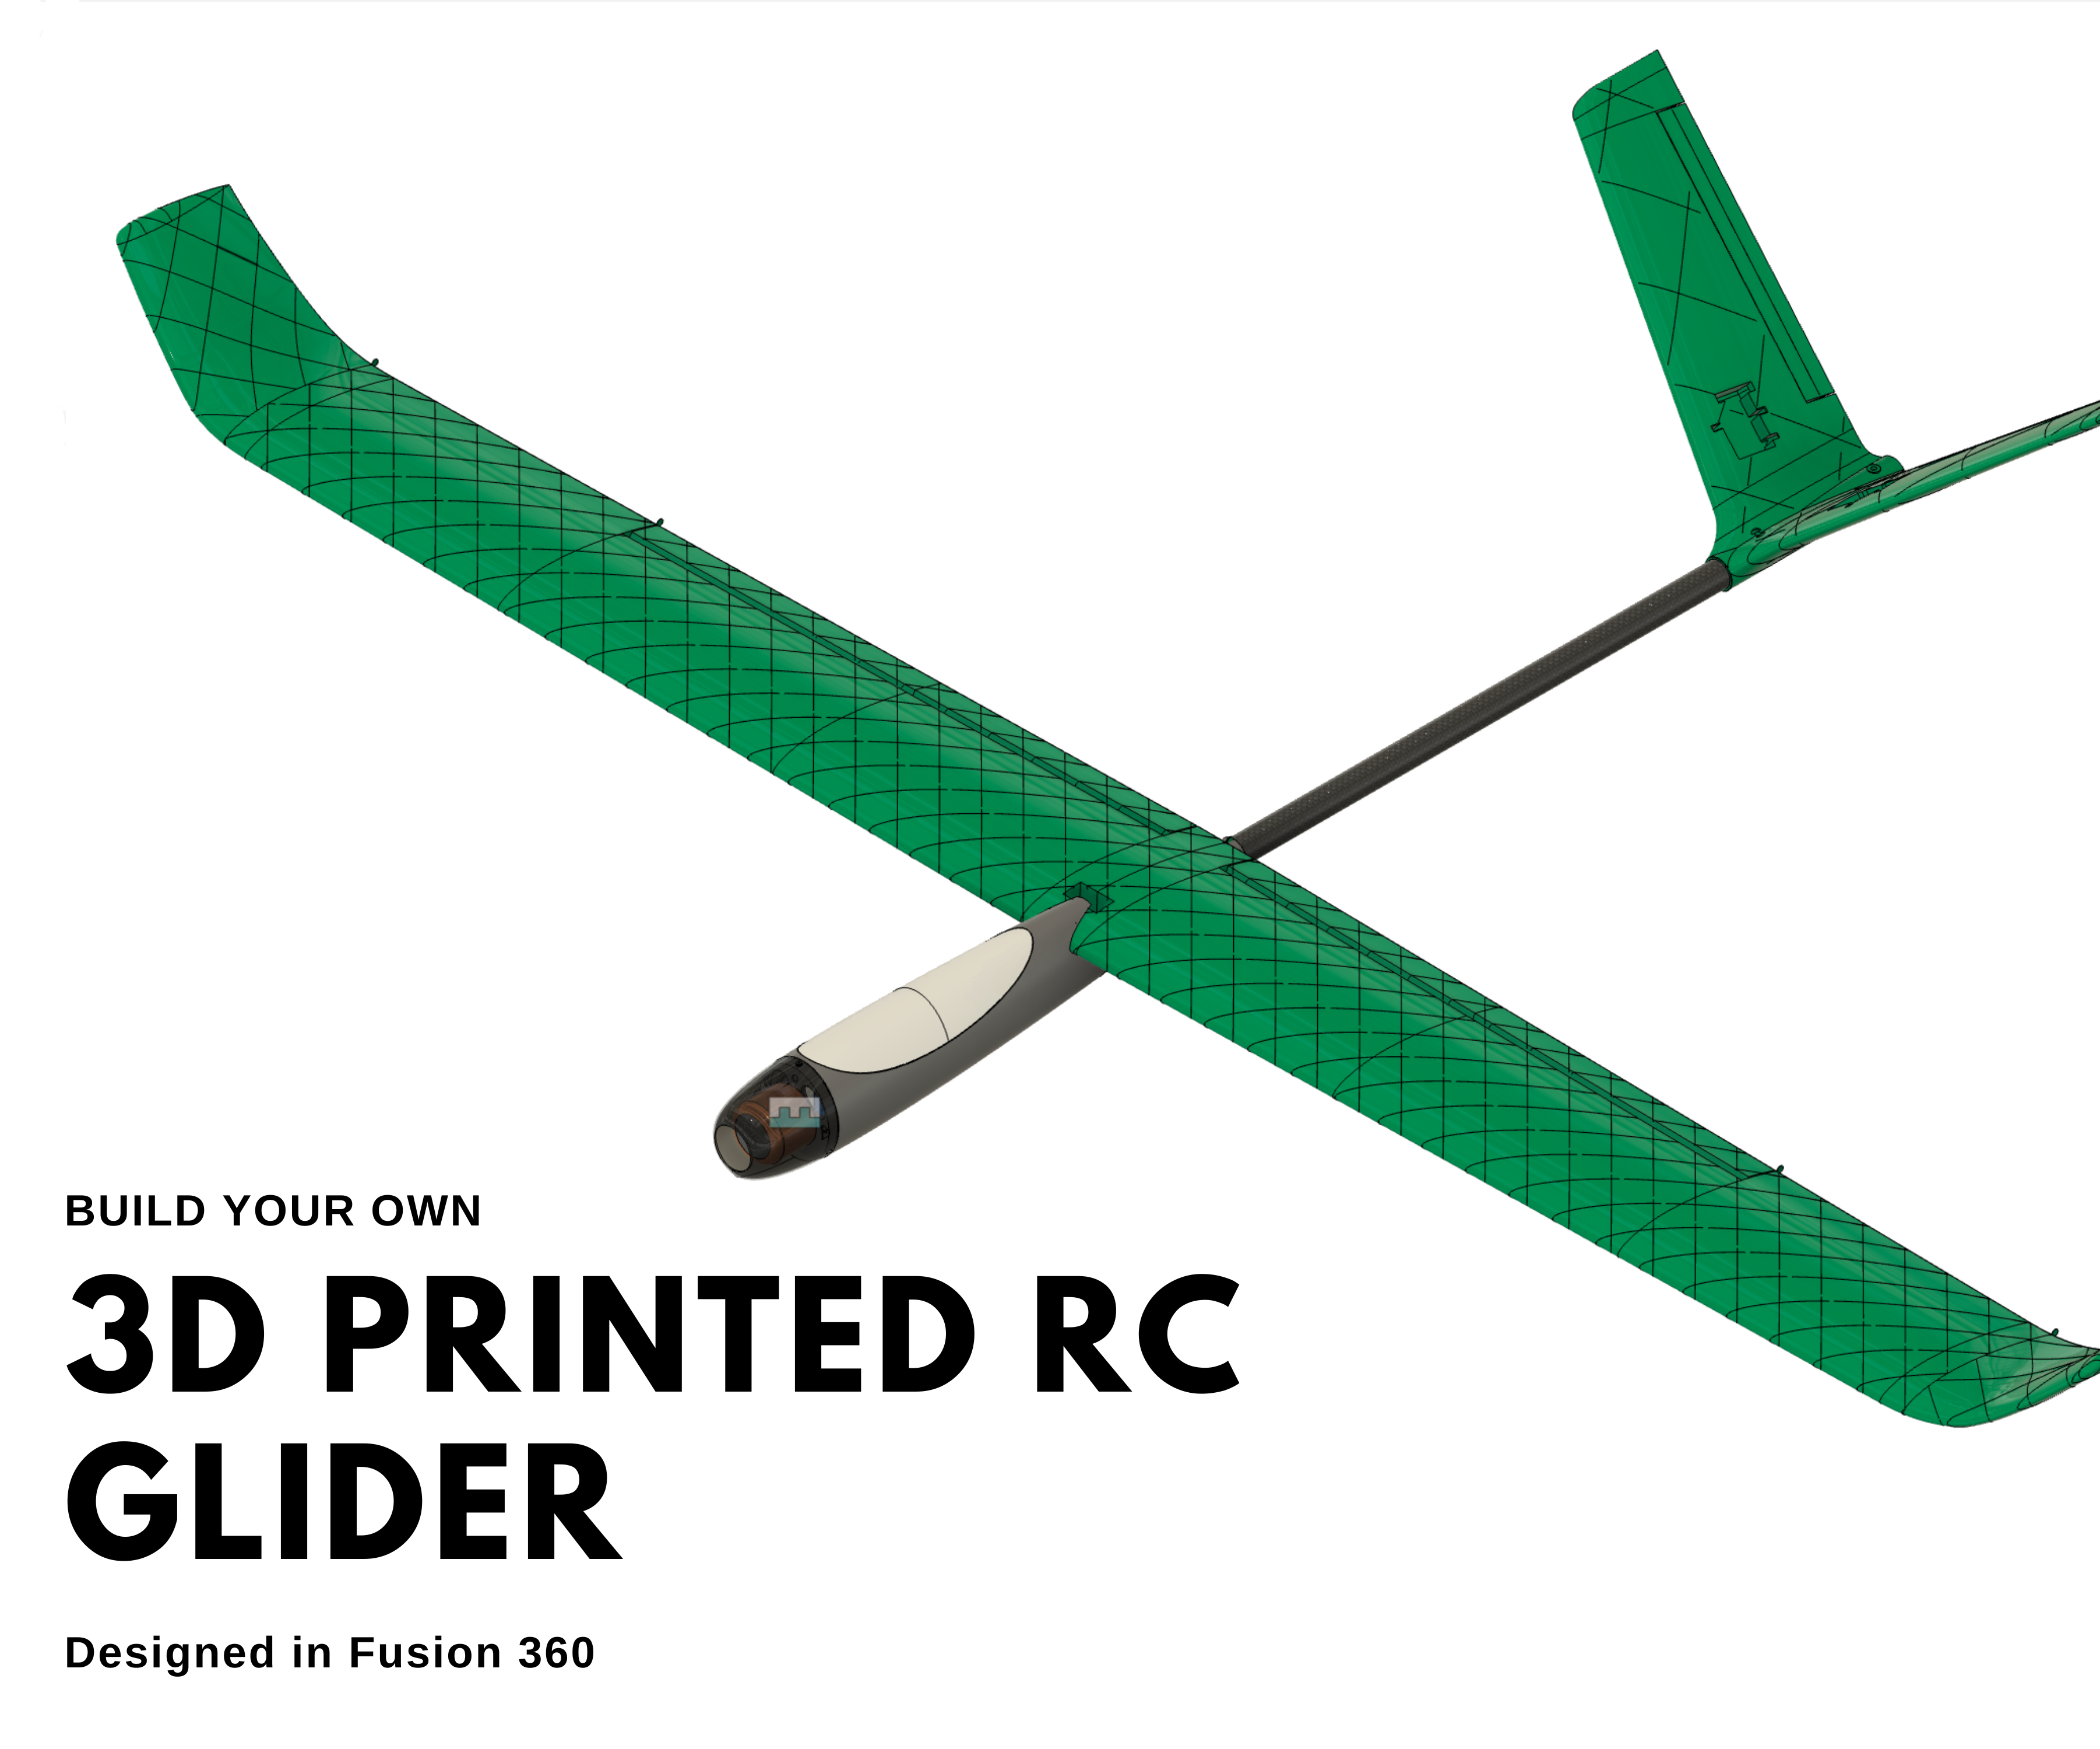 Design and Build Your Own 3D Printed RC Plane